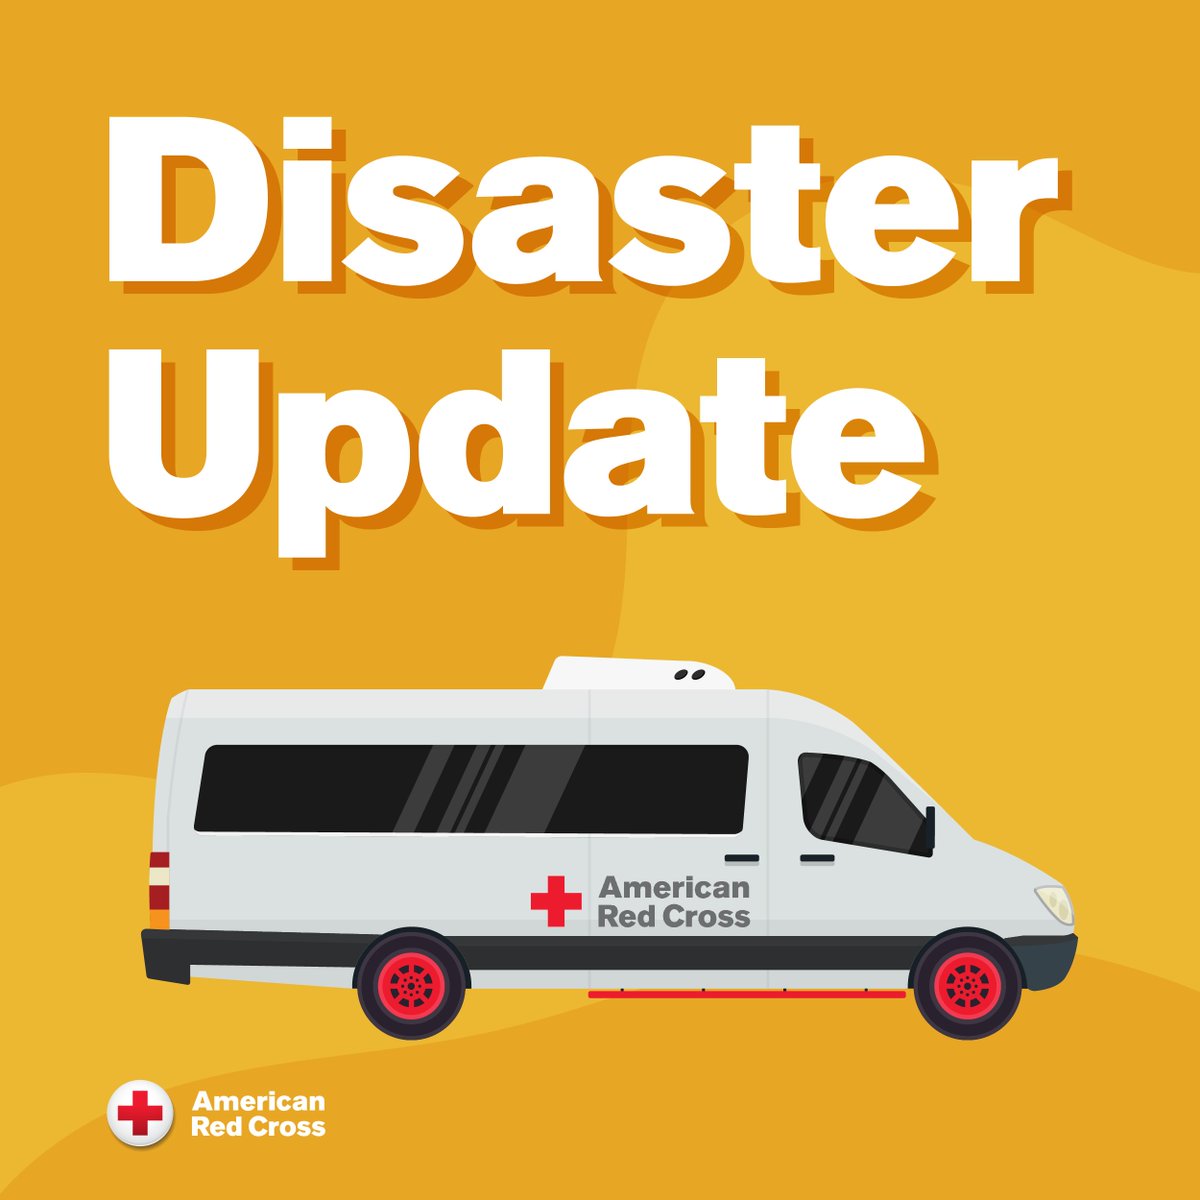 On Saturday and Sunday, our Disaster Action Team helped 3 families - 7 people - following home fires in Philadelphia (4900 block of N. 4th St. & 400 block Caskey St.) and Bensalem (1400 block Gibson Rd.). #EndHomeFires